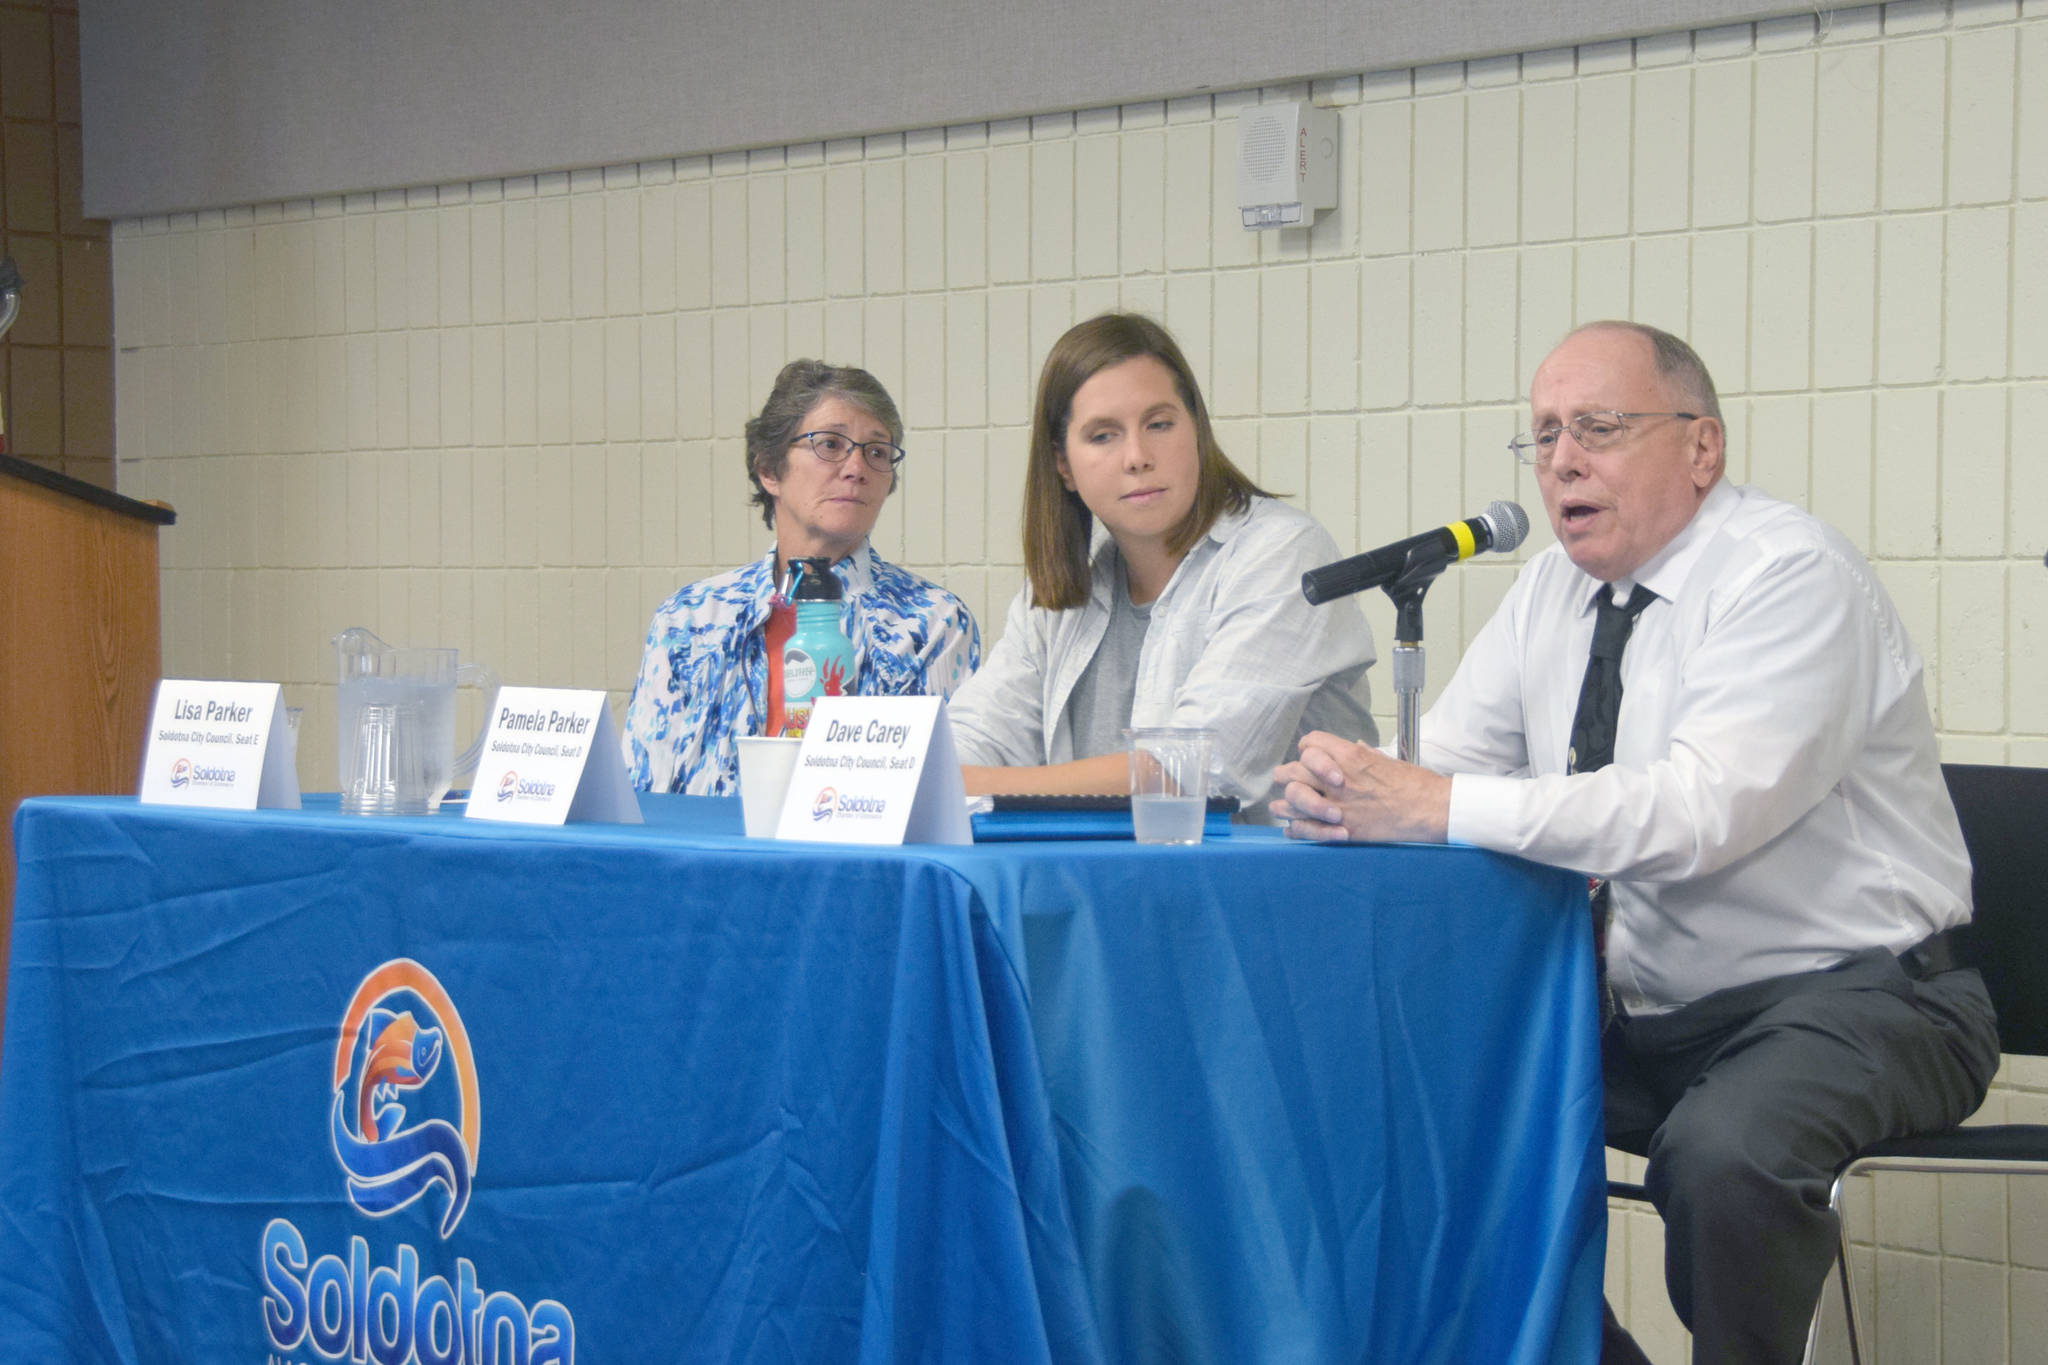 Soldotna City Council candidates Lisa Parker, Pamela Parker and Dave Carey speak to members of the Soldotna Chamber of Commerce at the Soldotna Sports Complex on Wednesday. (Photo by Brian Mazurek/Peninsula Clarion)